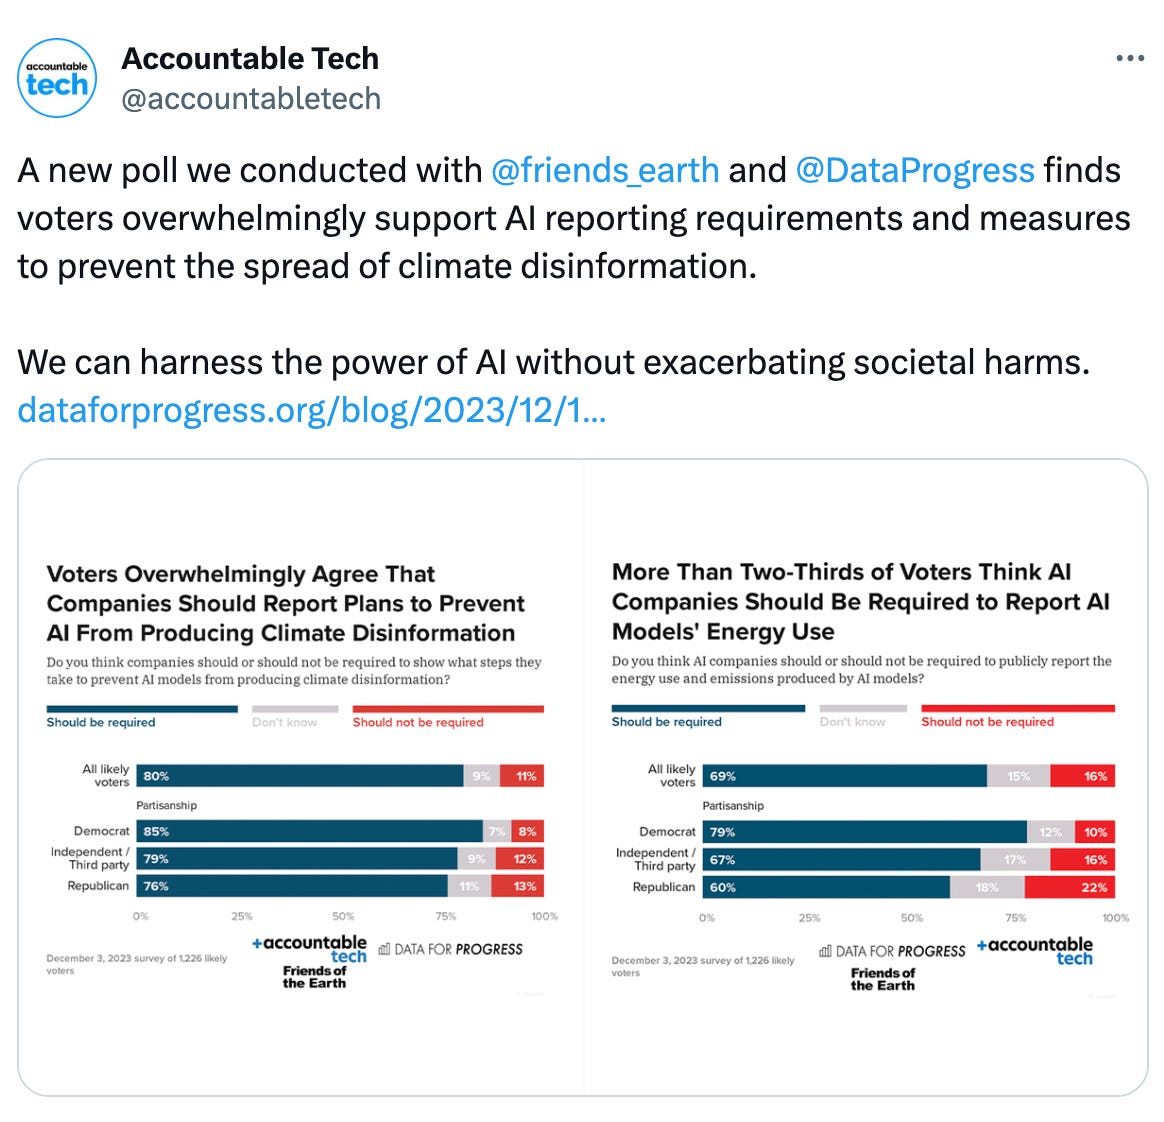 Tweet from Accountable Tech @accountabletech: A new poll we conducted with  @friends_earth  and  @DataProgress  finds voters overwhelmingly support AI reporting requirements and measures to prevent the spread of climate disinformation.  We can harness the power of AI without exacerbating societal harms.